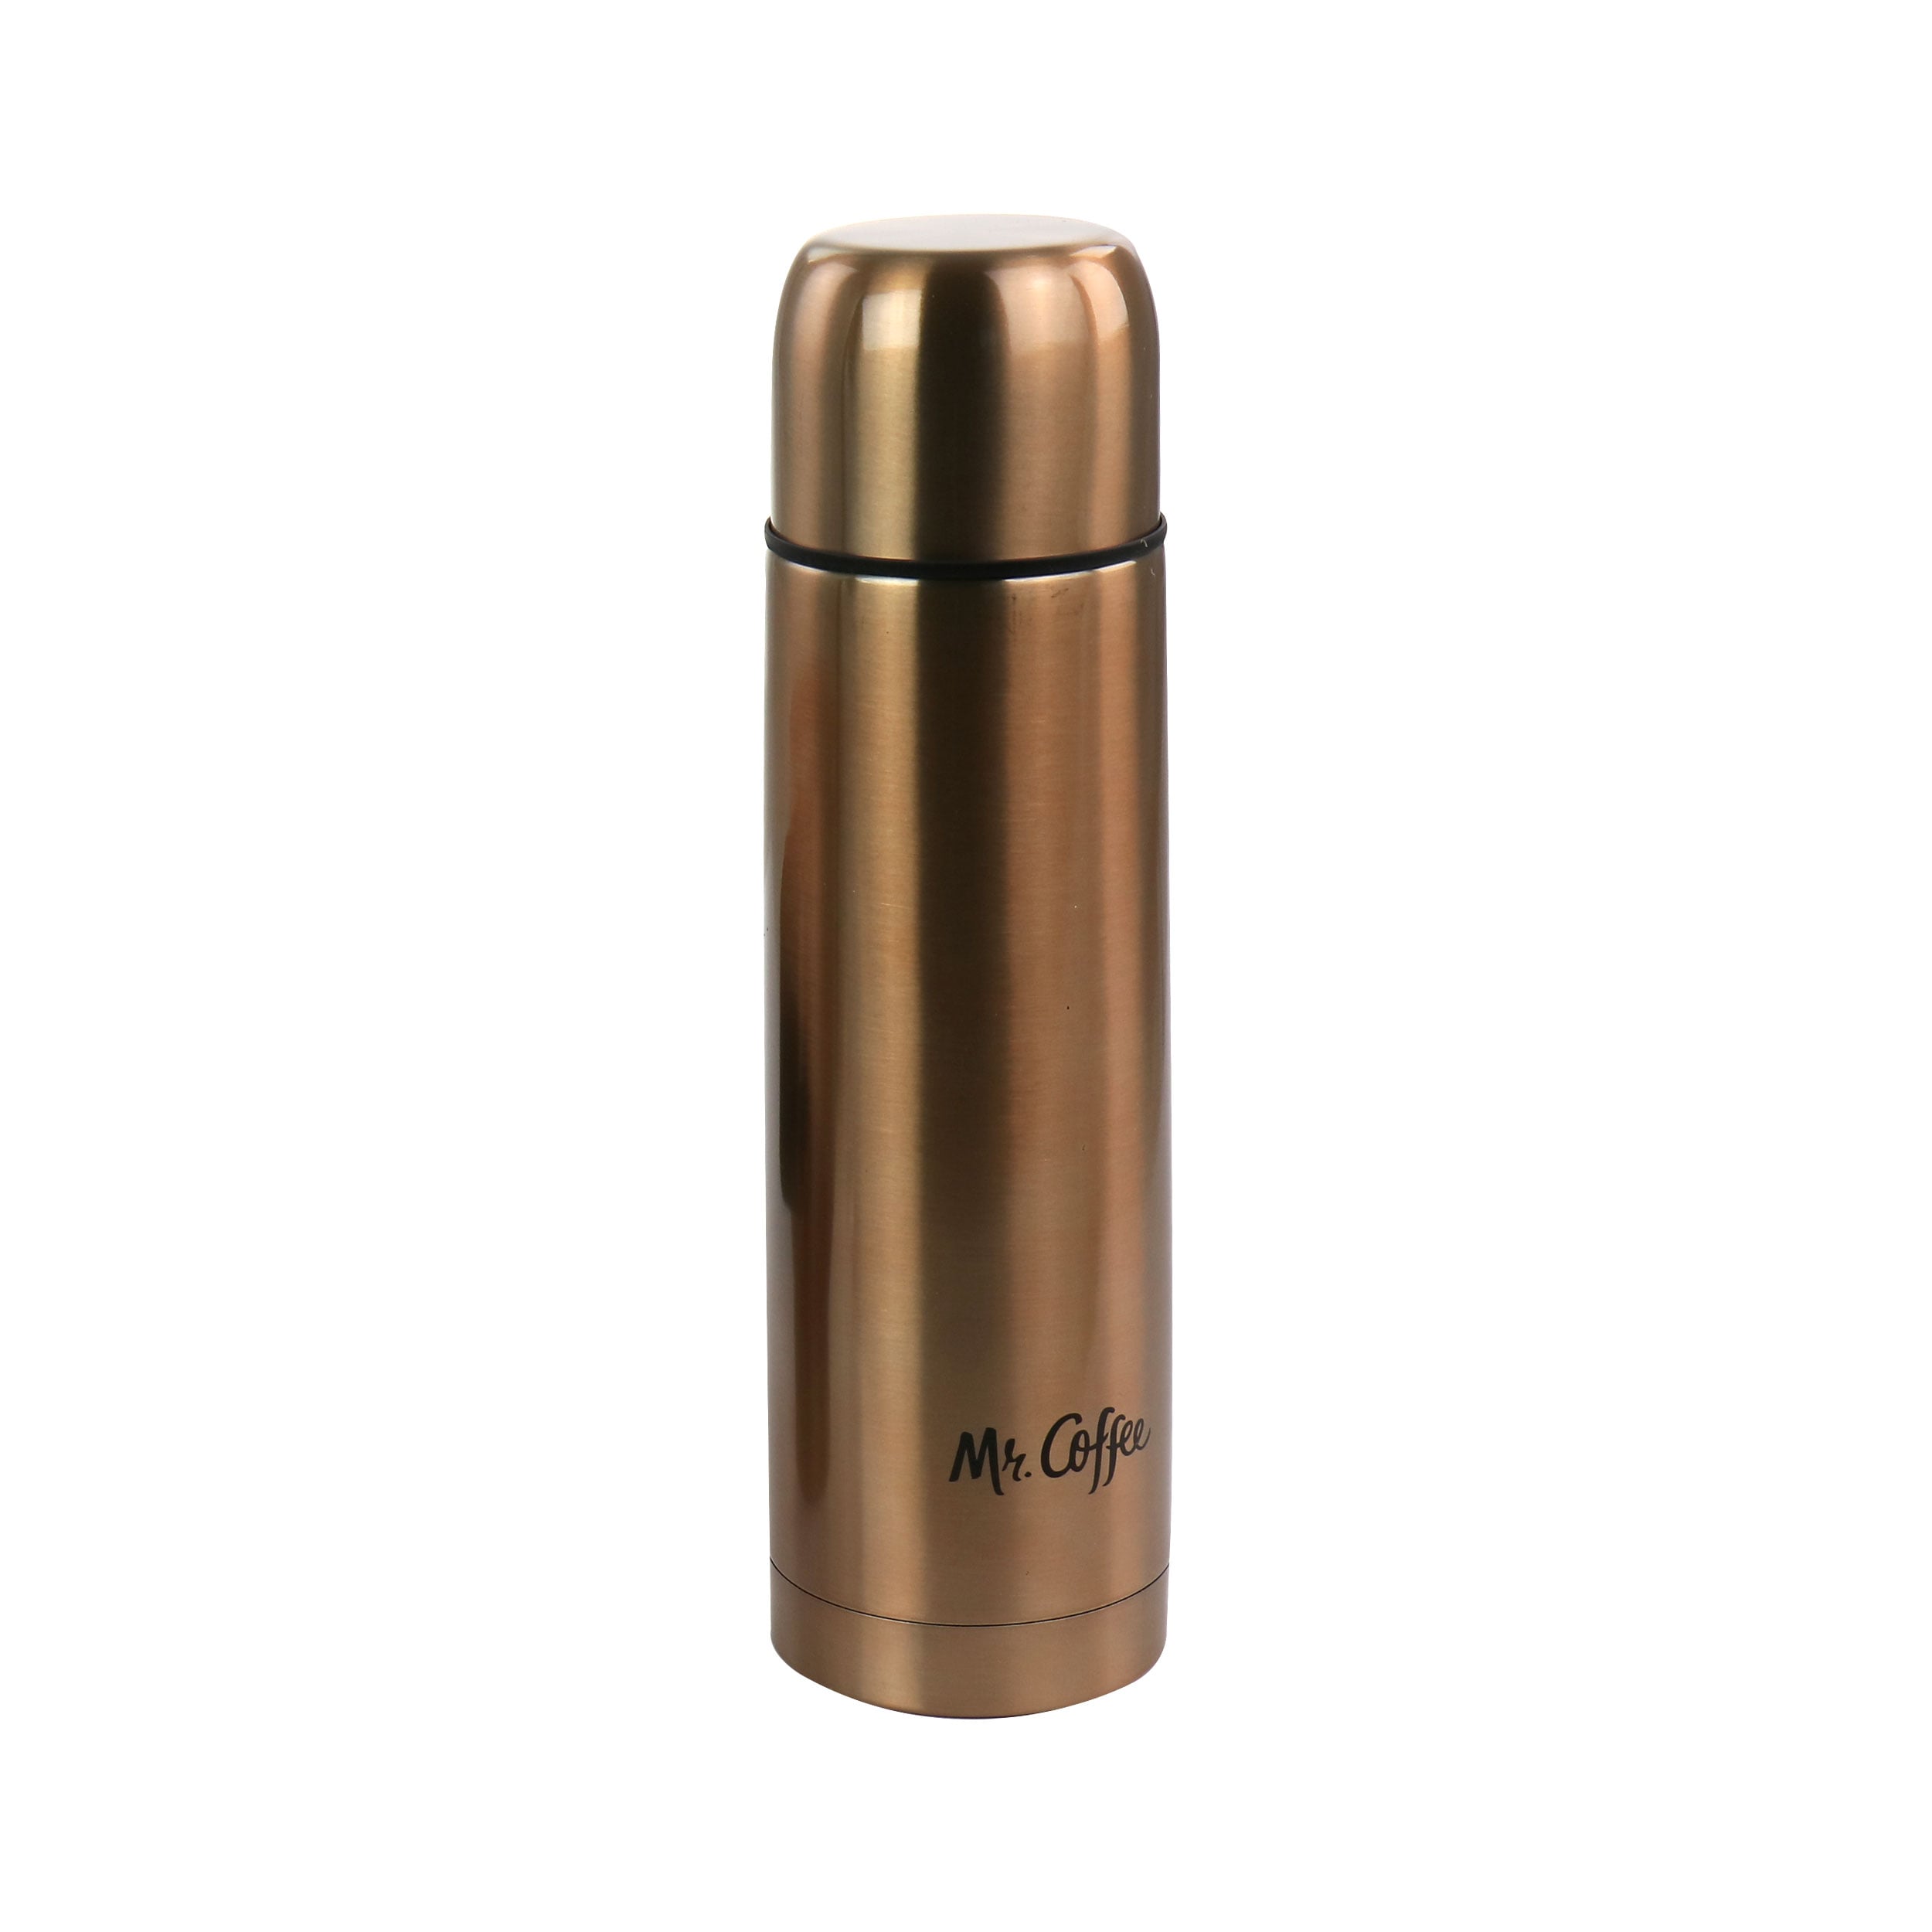 Mr. Coffee 12.5 Ounce Stainless Steel Insulated Thermal Travel Mug Set of 3